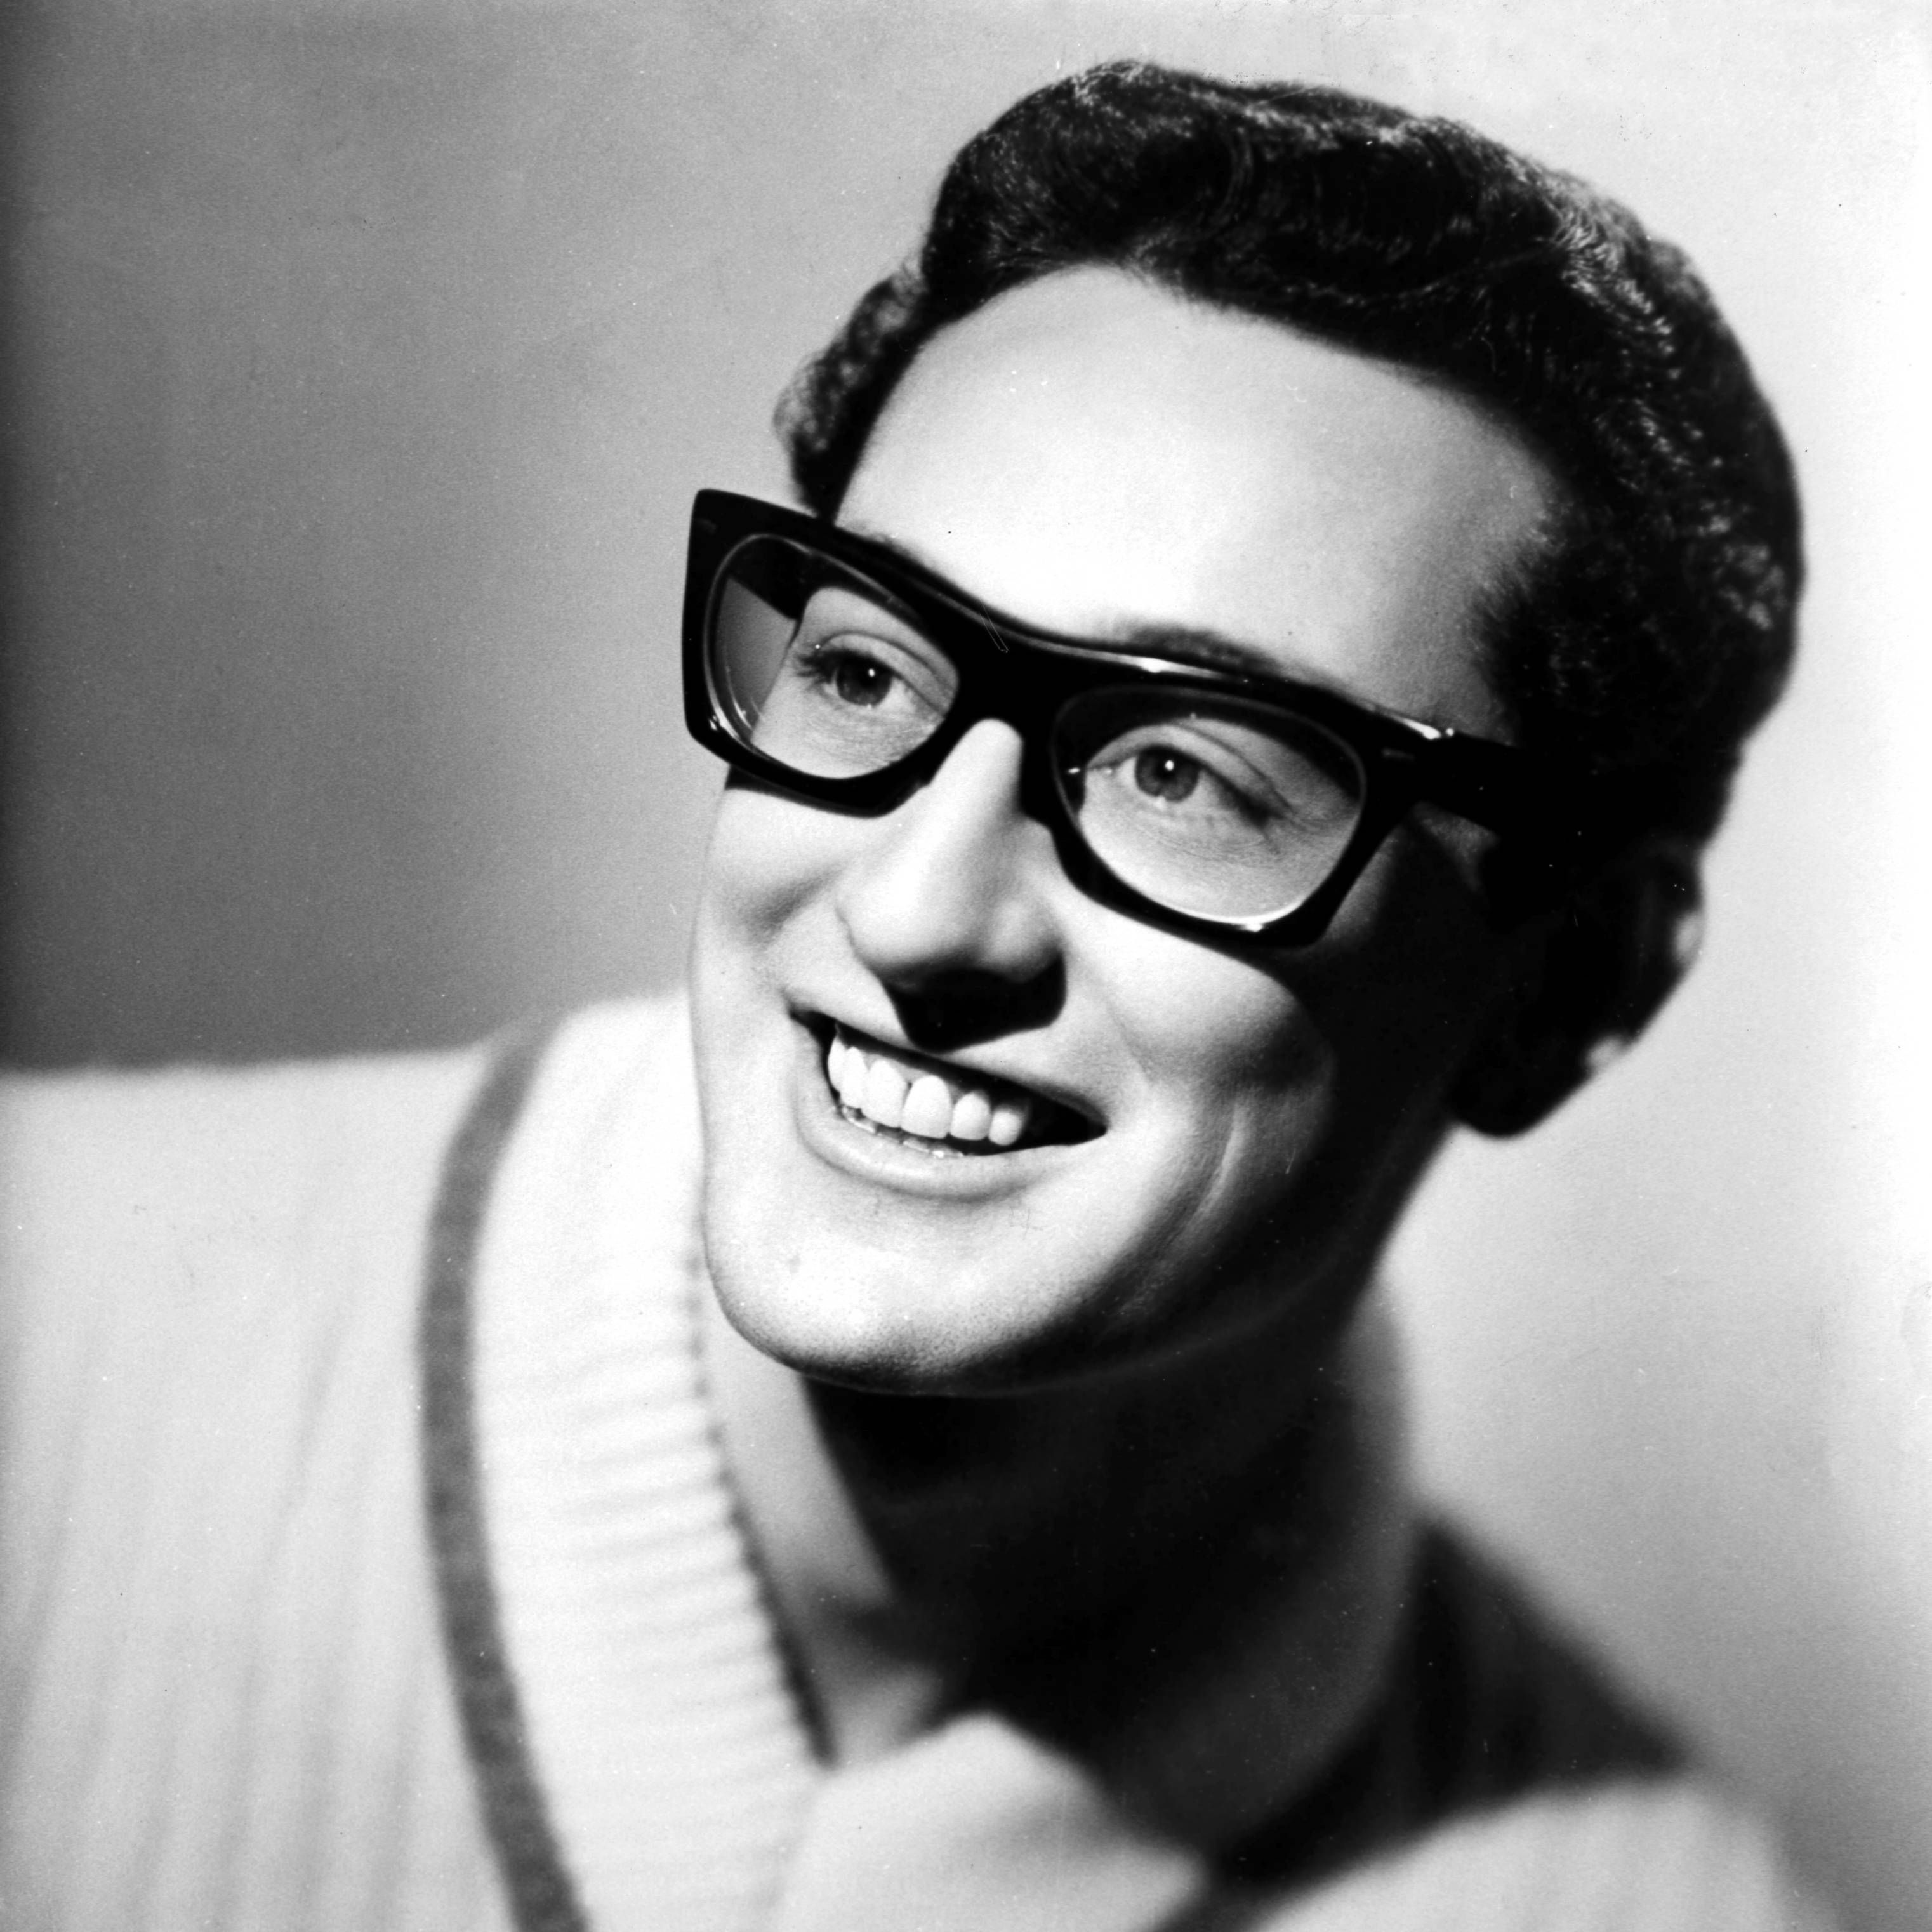 Buddy Holly - Rave On: A Rock 'n' Roll Celebration of Joy and Youth